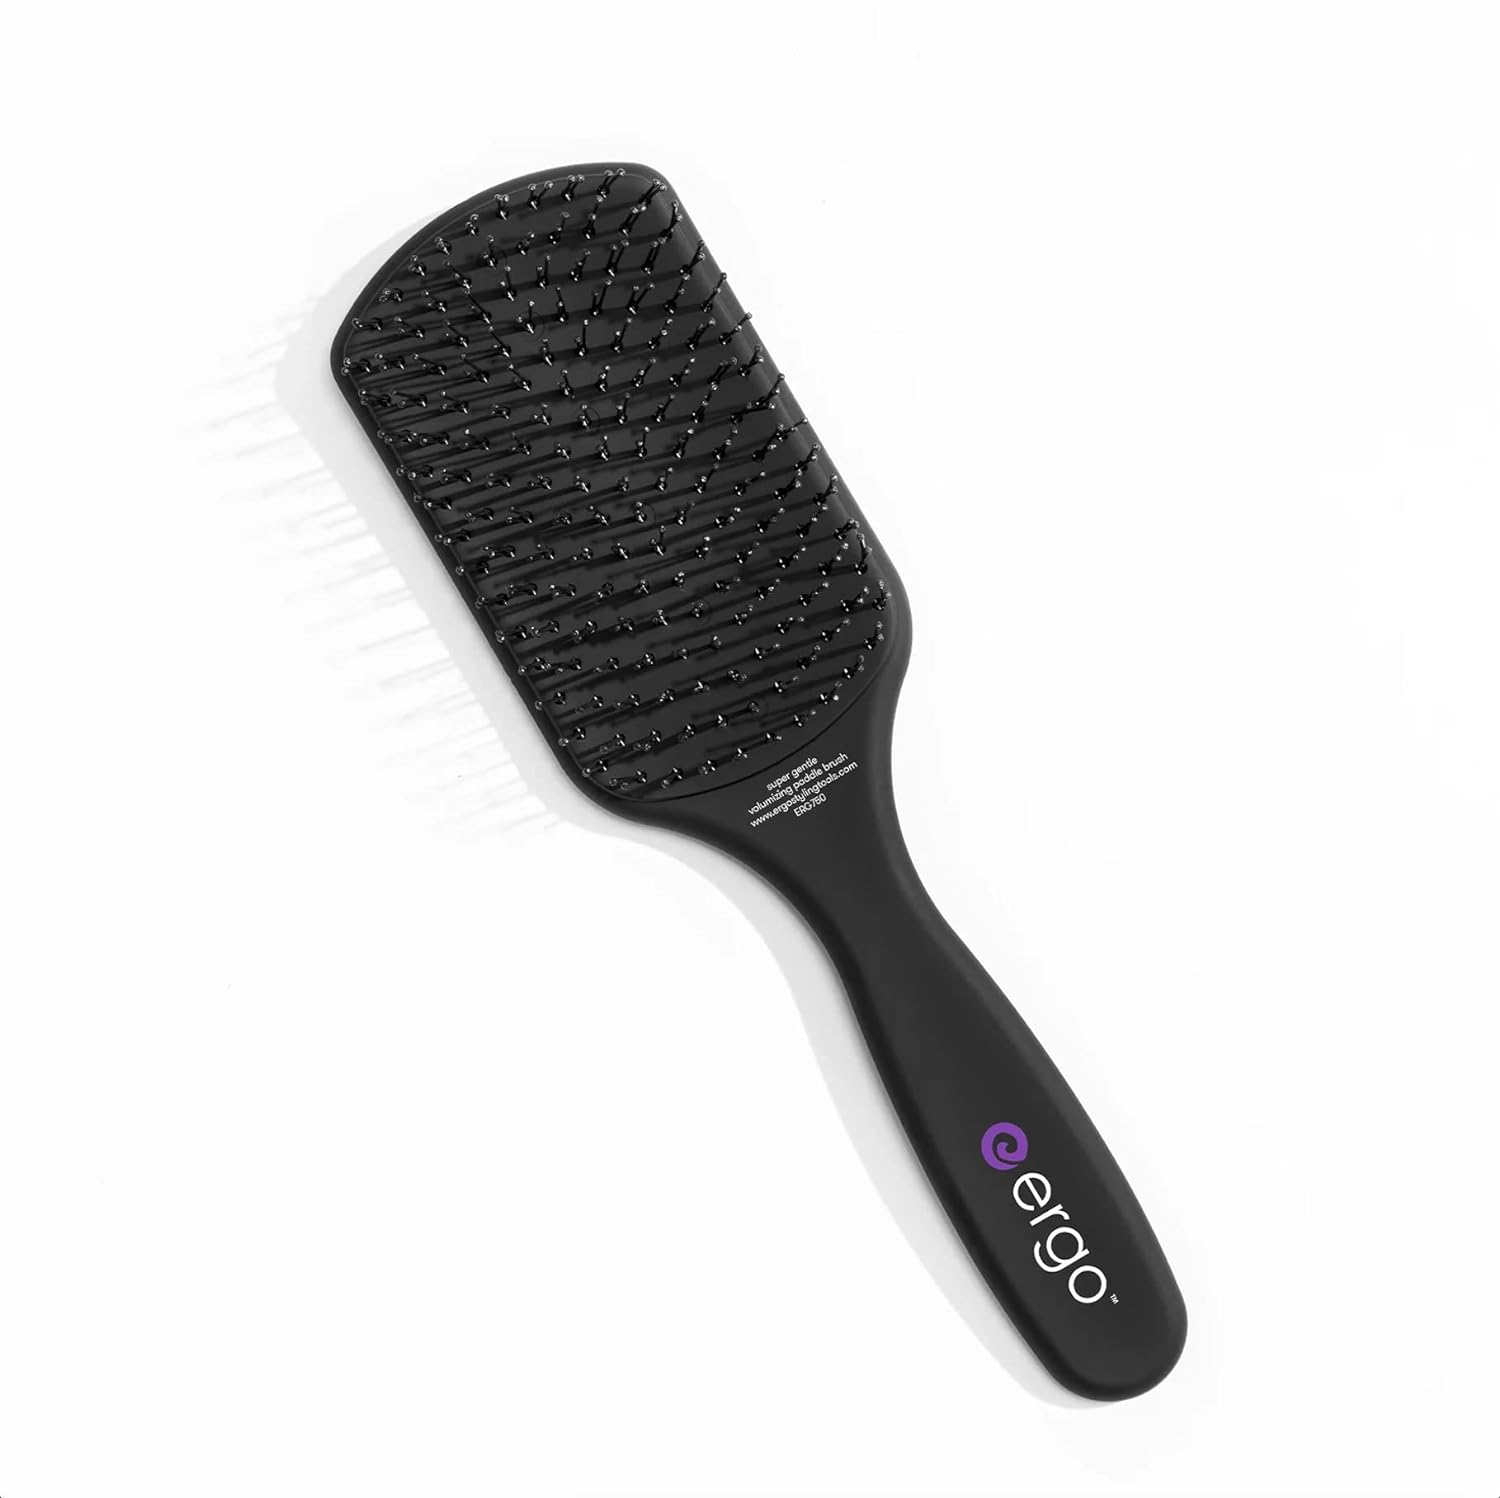 Super Gentle Mini Paddle Brush - Small Detangling Hair Brush for Wet and Dry Use - Essential Hair Care, Styling, Blow Drying Tool (ERG750)